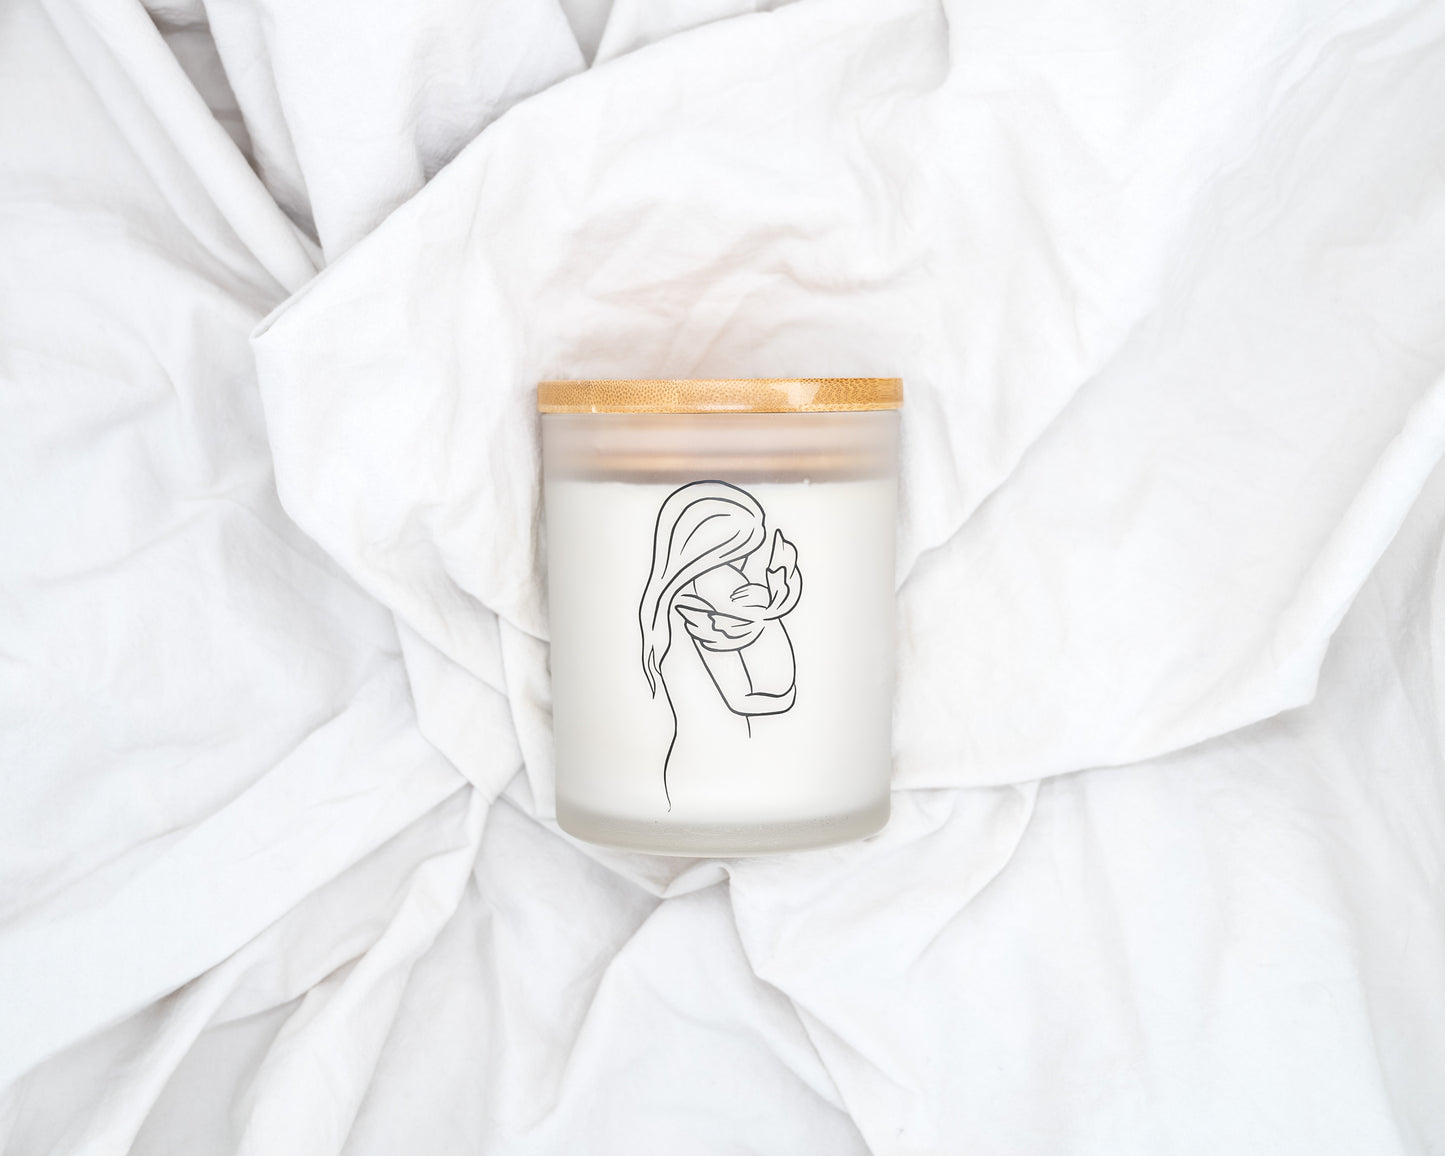 Angel Baby Memorial Candle